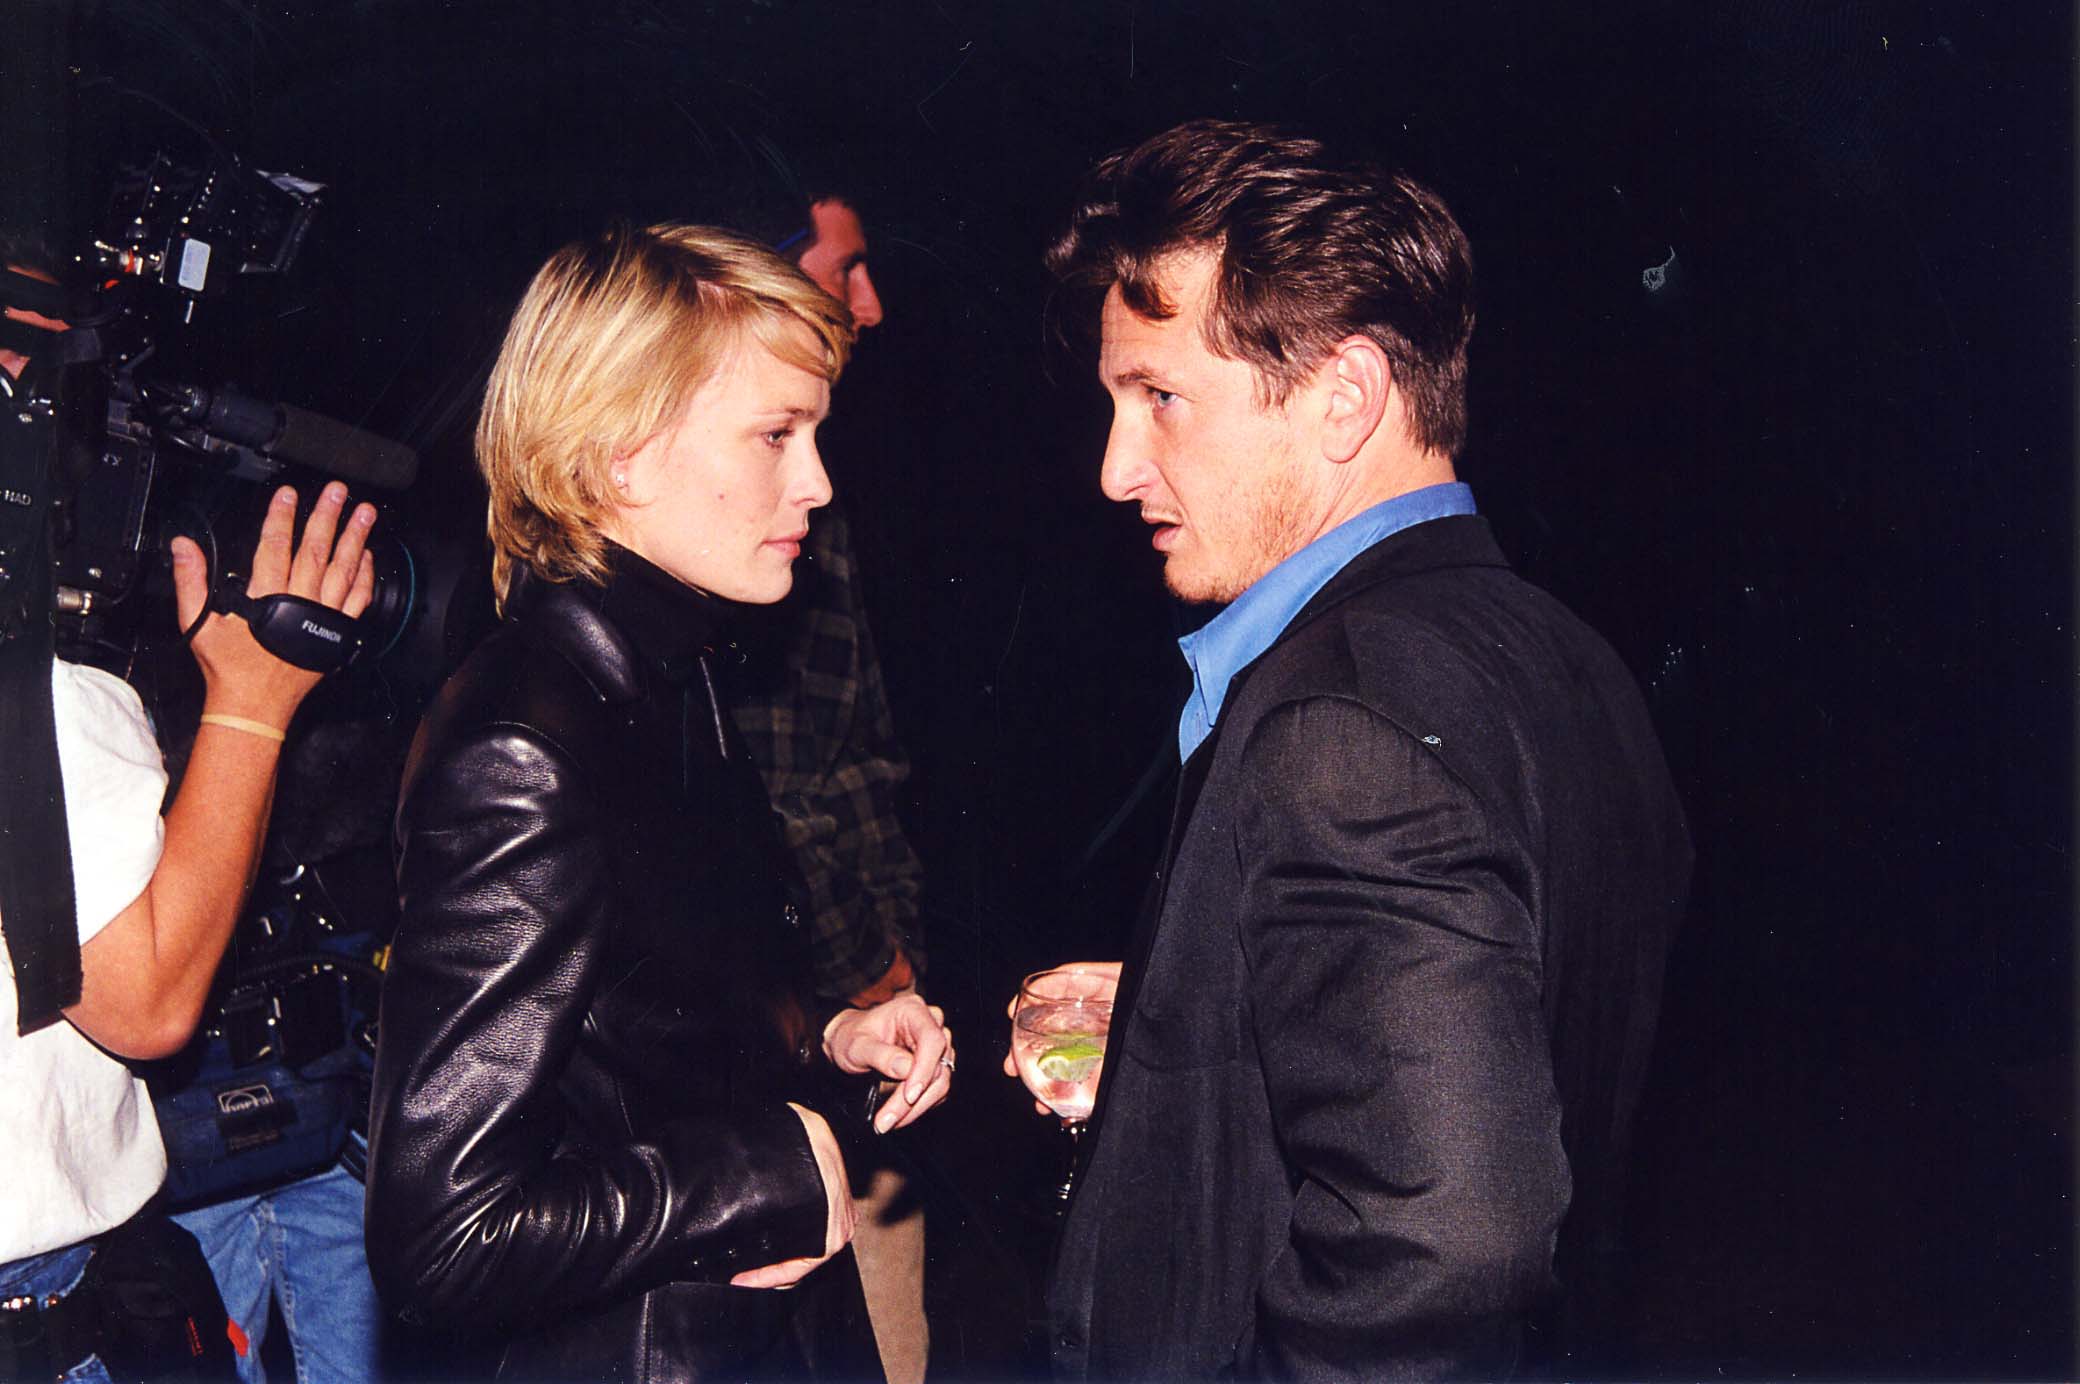 Sean Penn and Robin Wright Penn during the premiere of "The Thin Red Line " on September 10, 1998 in Los Angeles ┃Source: Getty Images